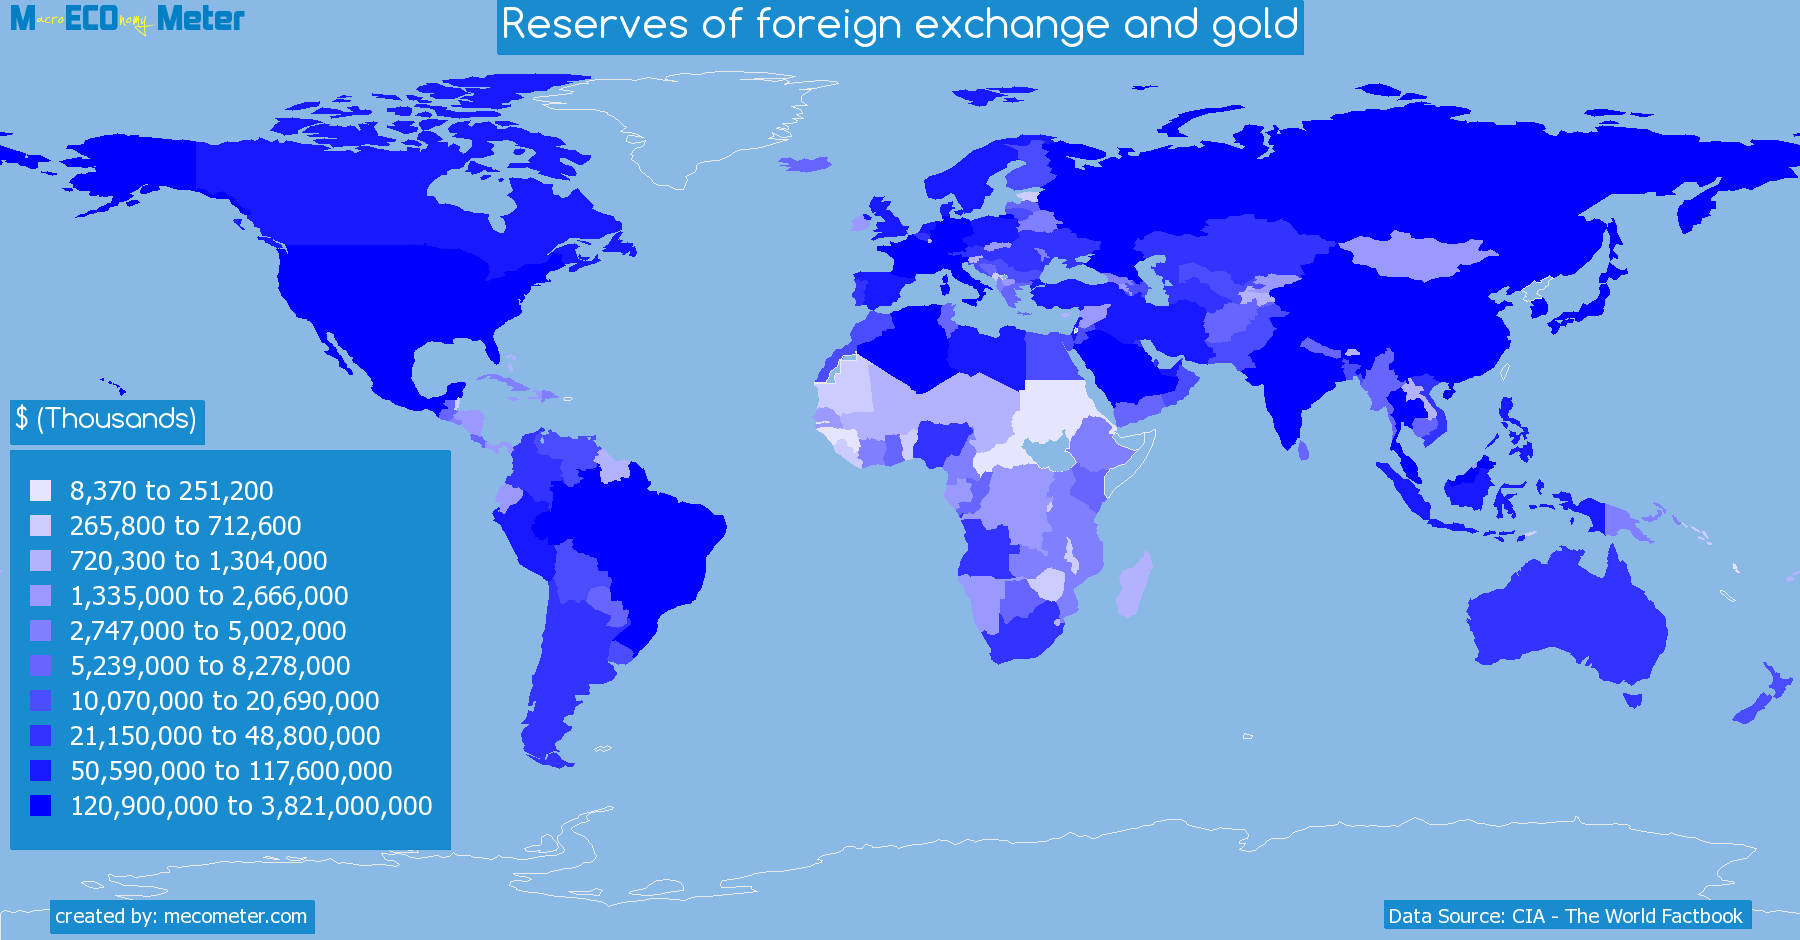 Worldmap of all countries colored to reflect the values of Reserves of foreign exchange and gold